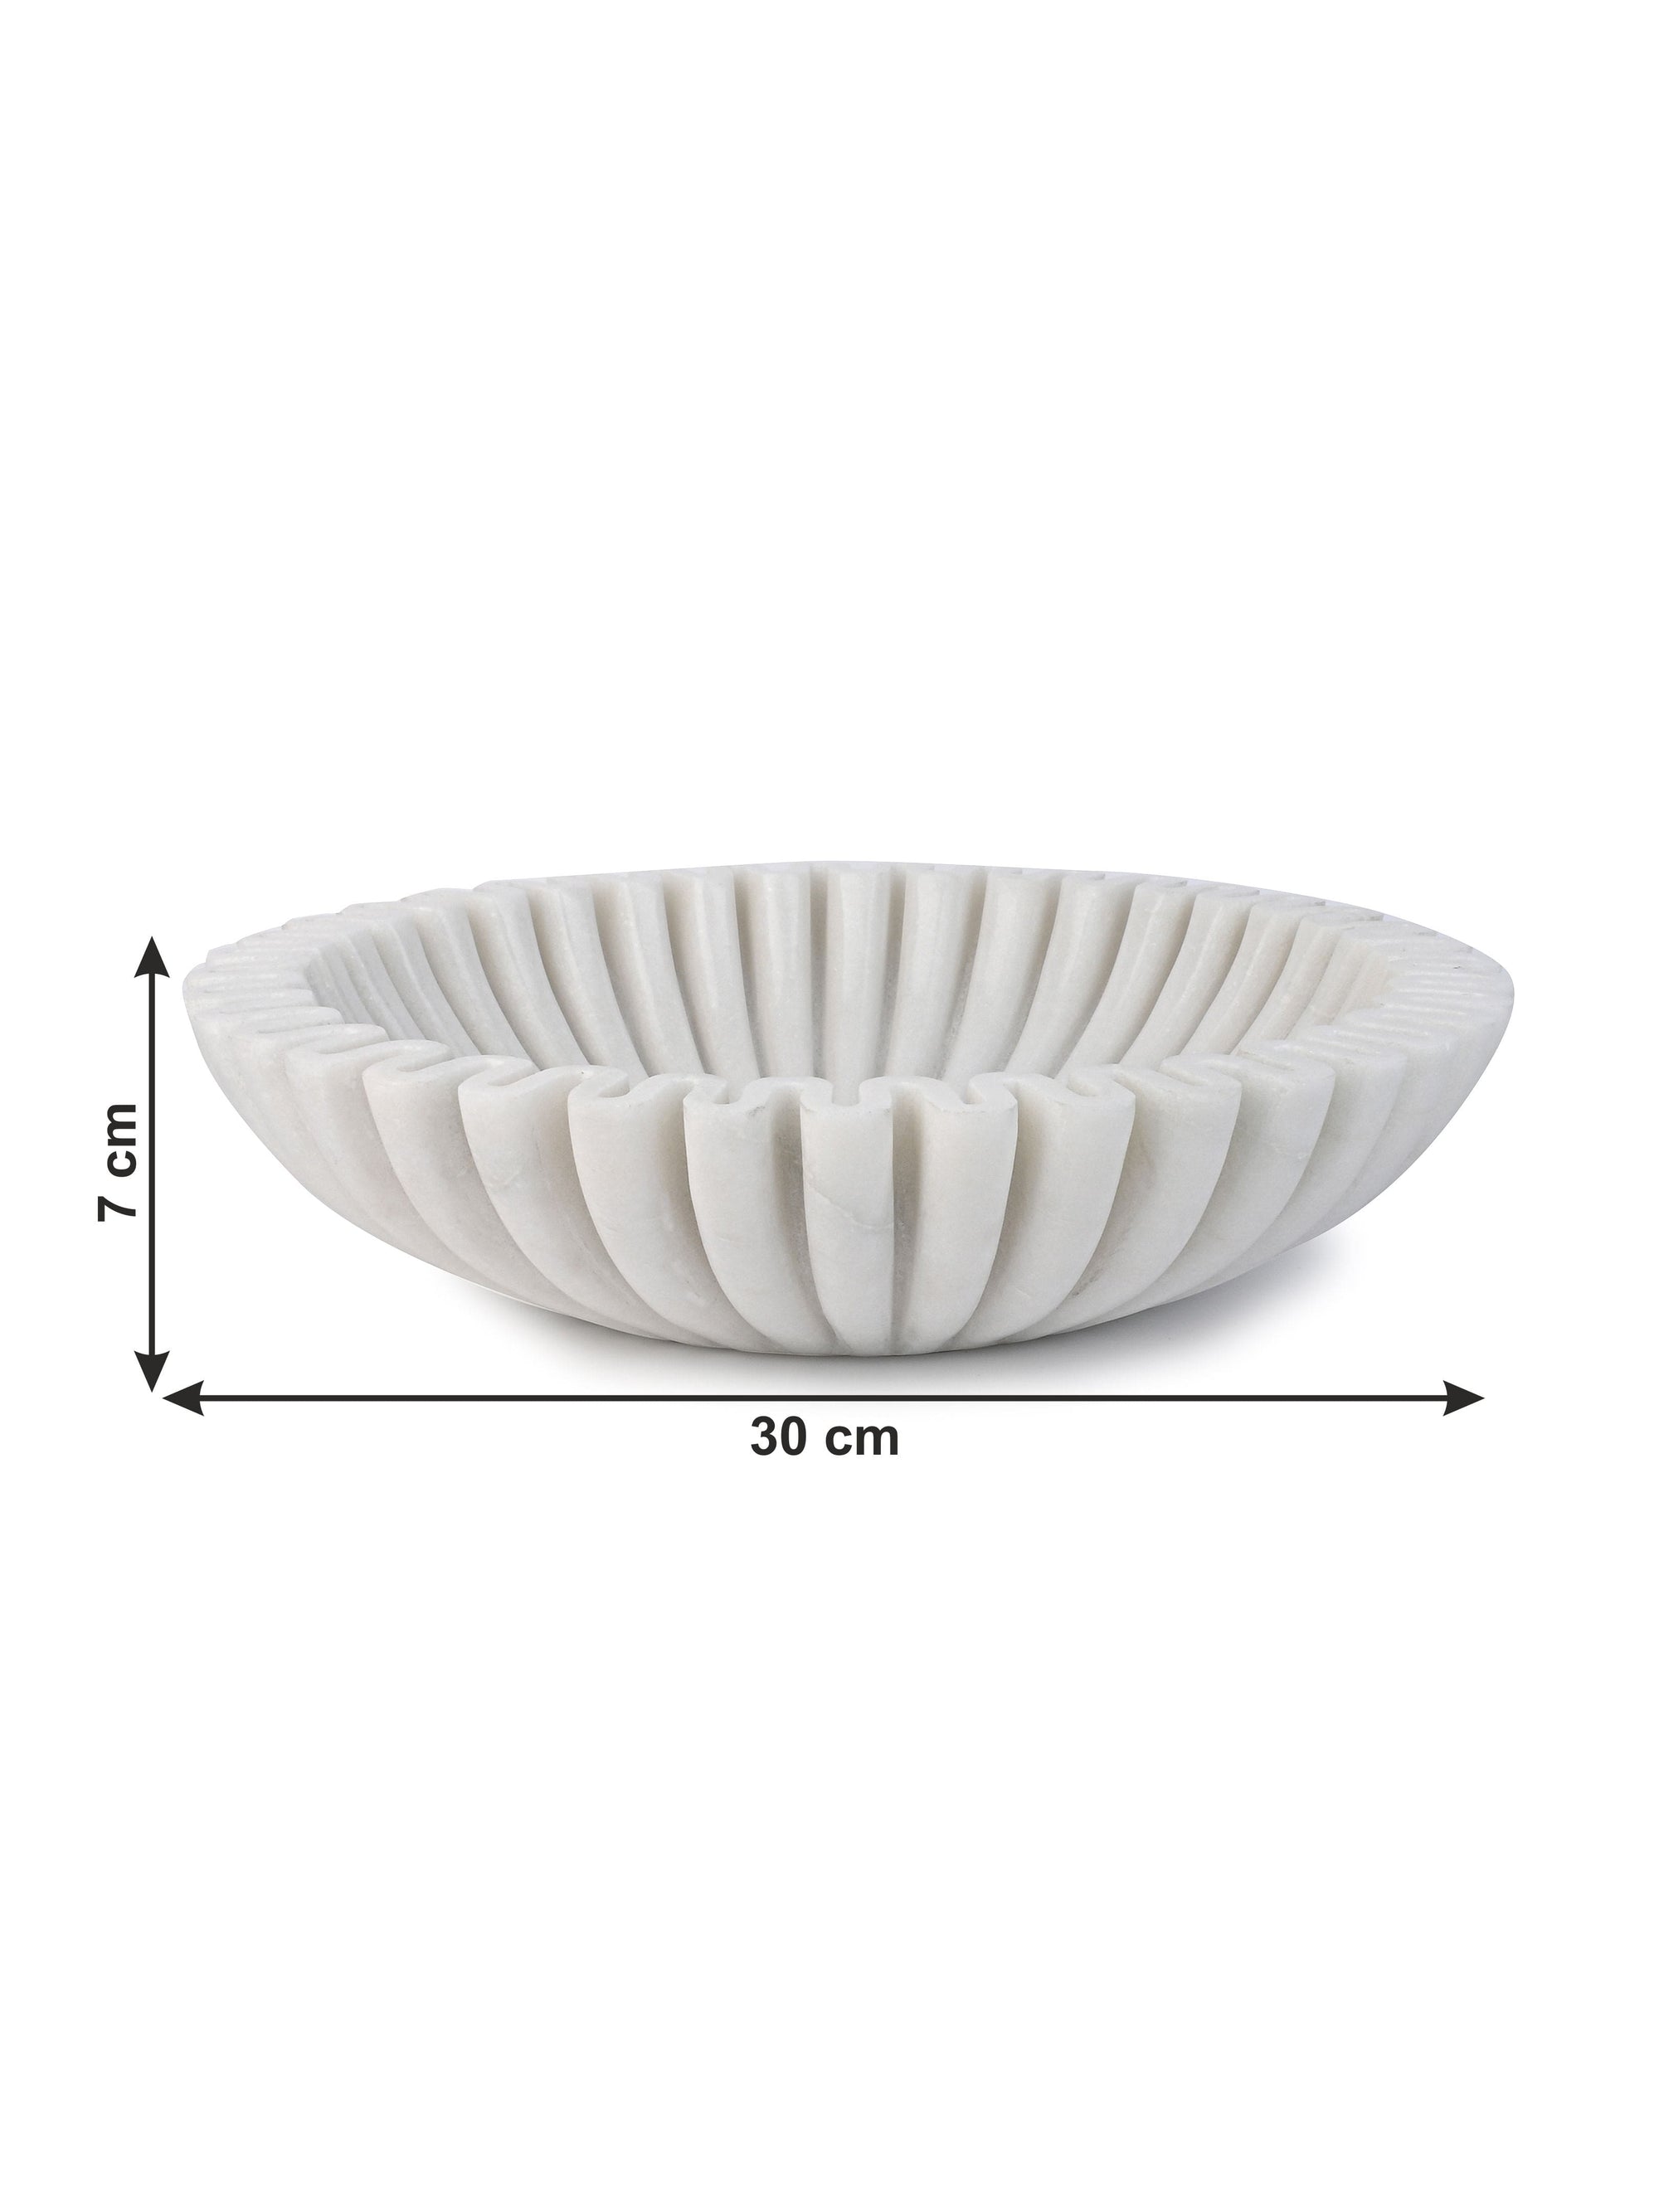 Single piece Marble crafted Big size Urli for Puja and Home Decor - 12 inches diameter